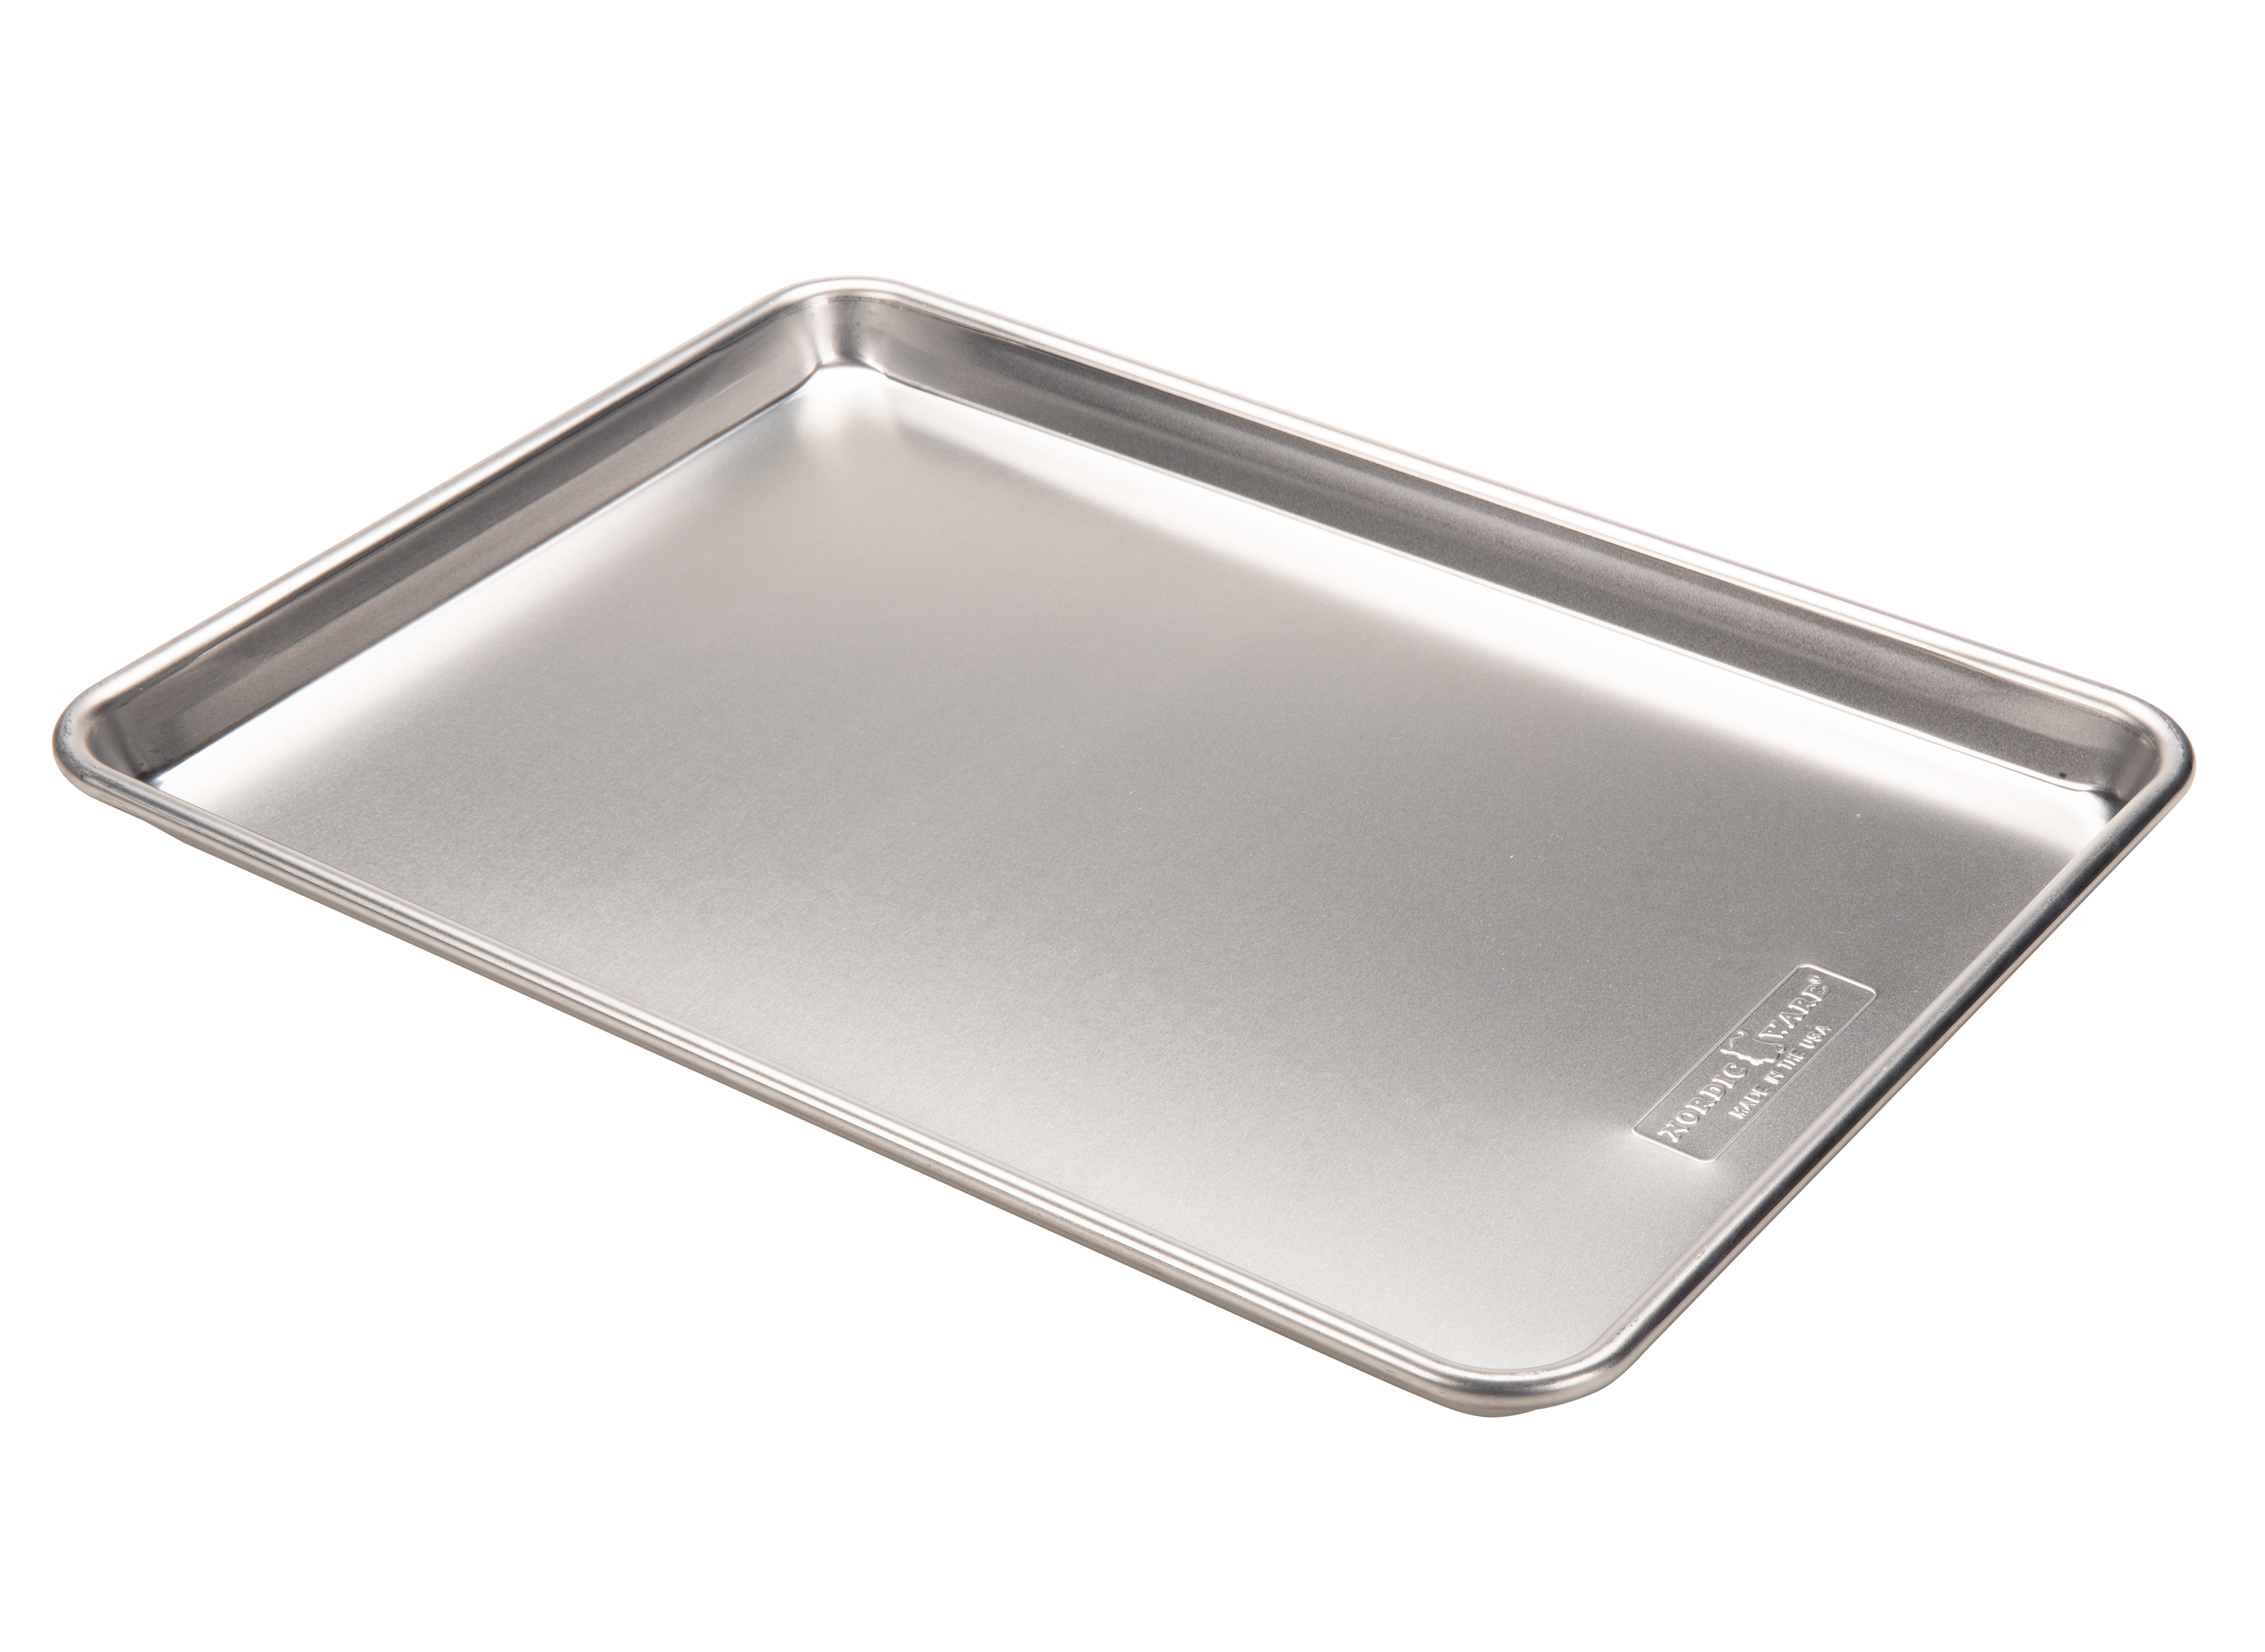 https://crdms.images.consumerreports.org/prod/products/cr/models/404172-sheet-pans-nordic-ware-naturals-baker-s-half-sheet-10022106.png